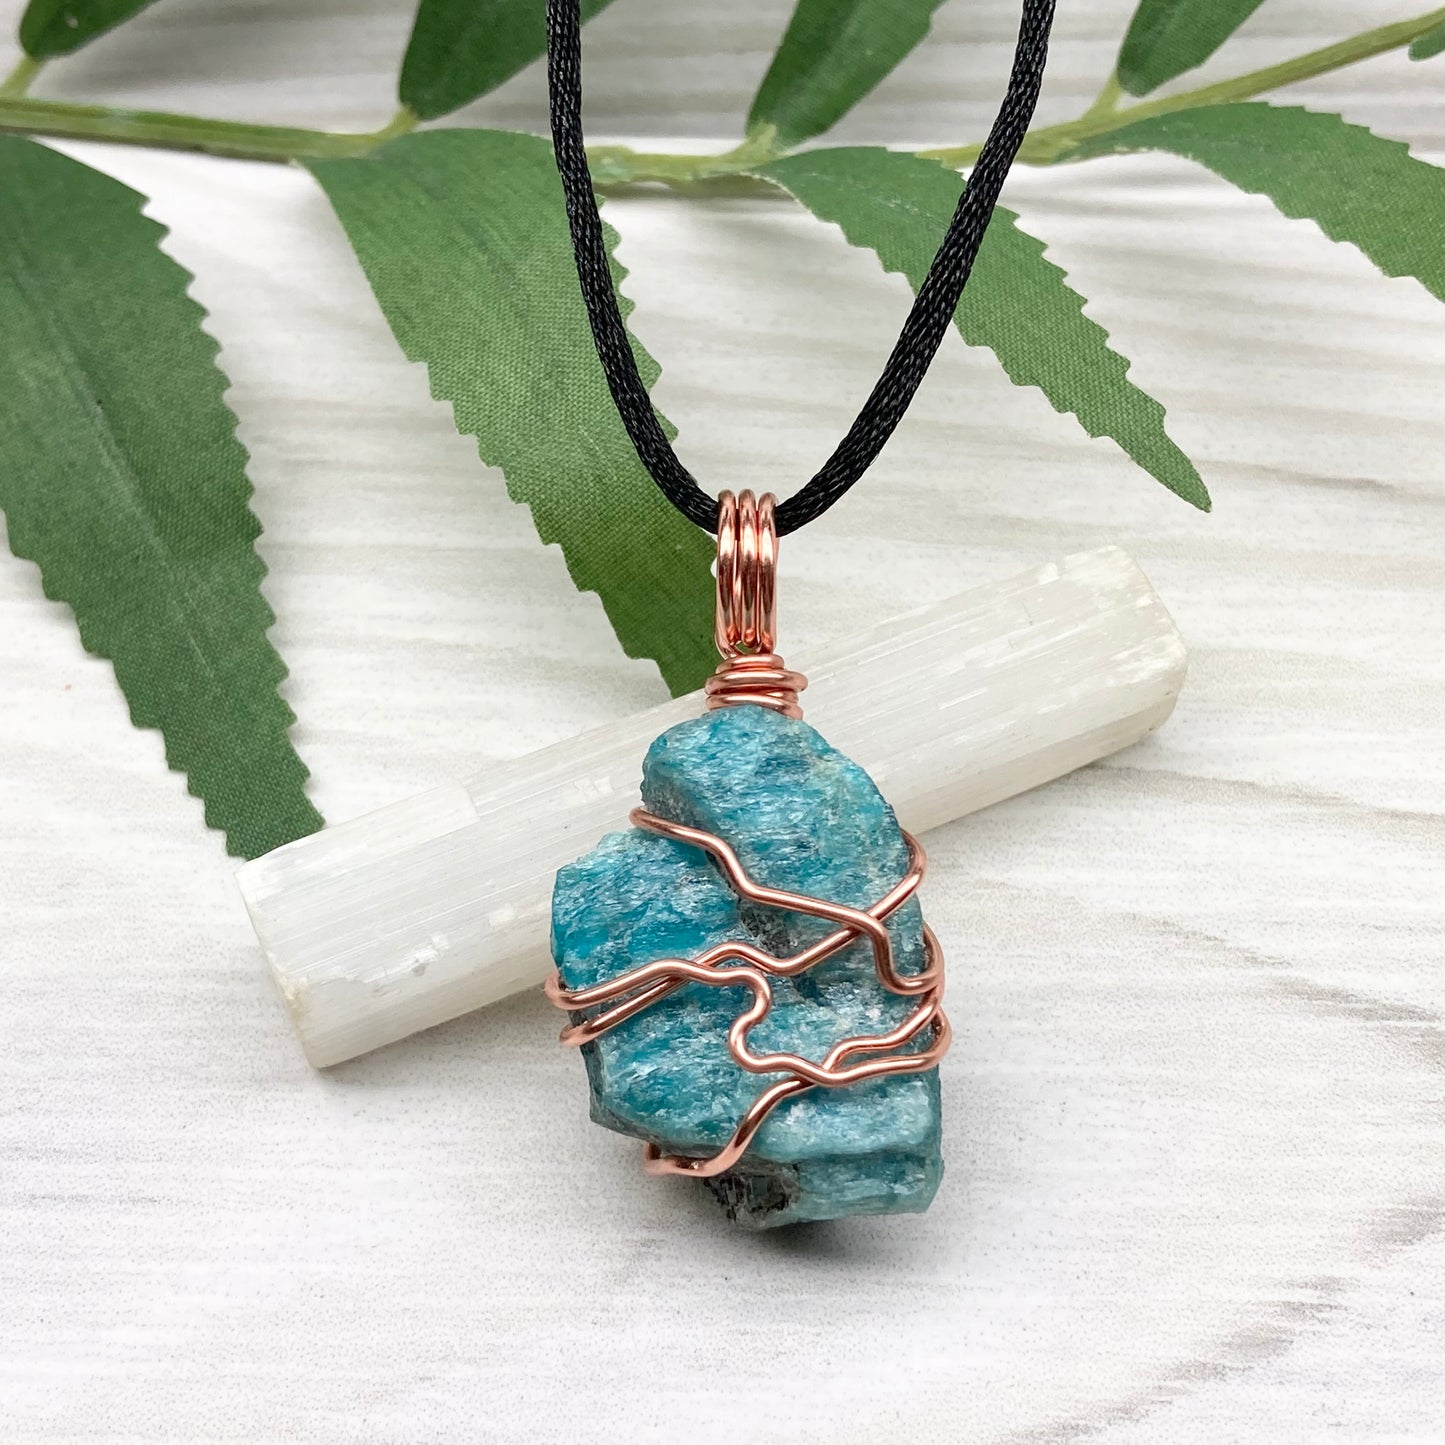 Blue Apatite Necklace. Raw Blue Apatite Stone Wrapped With Tarnish Resistant Copper Wire. This Pendant Was Handcrafted During The Moon In Scorpio. Comes On A Black Chain. Spiritual Jewelry For Him Or Her.